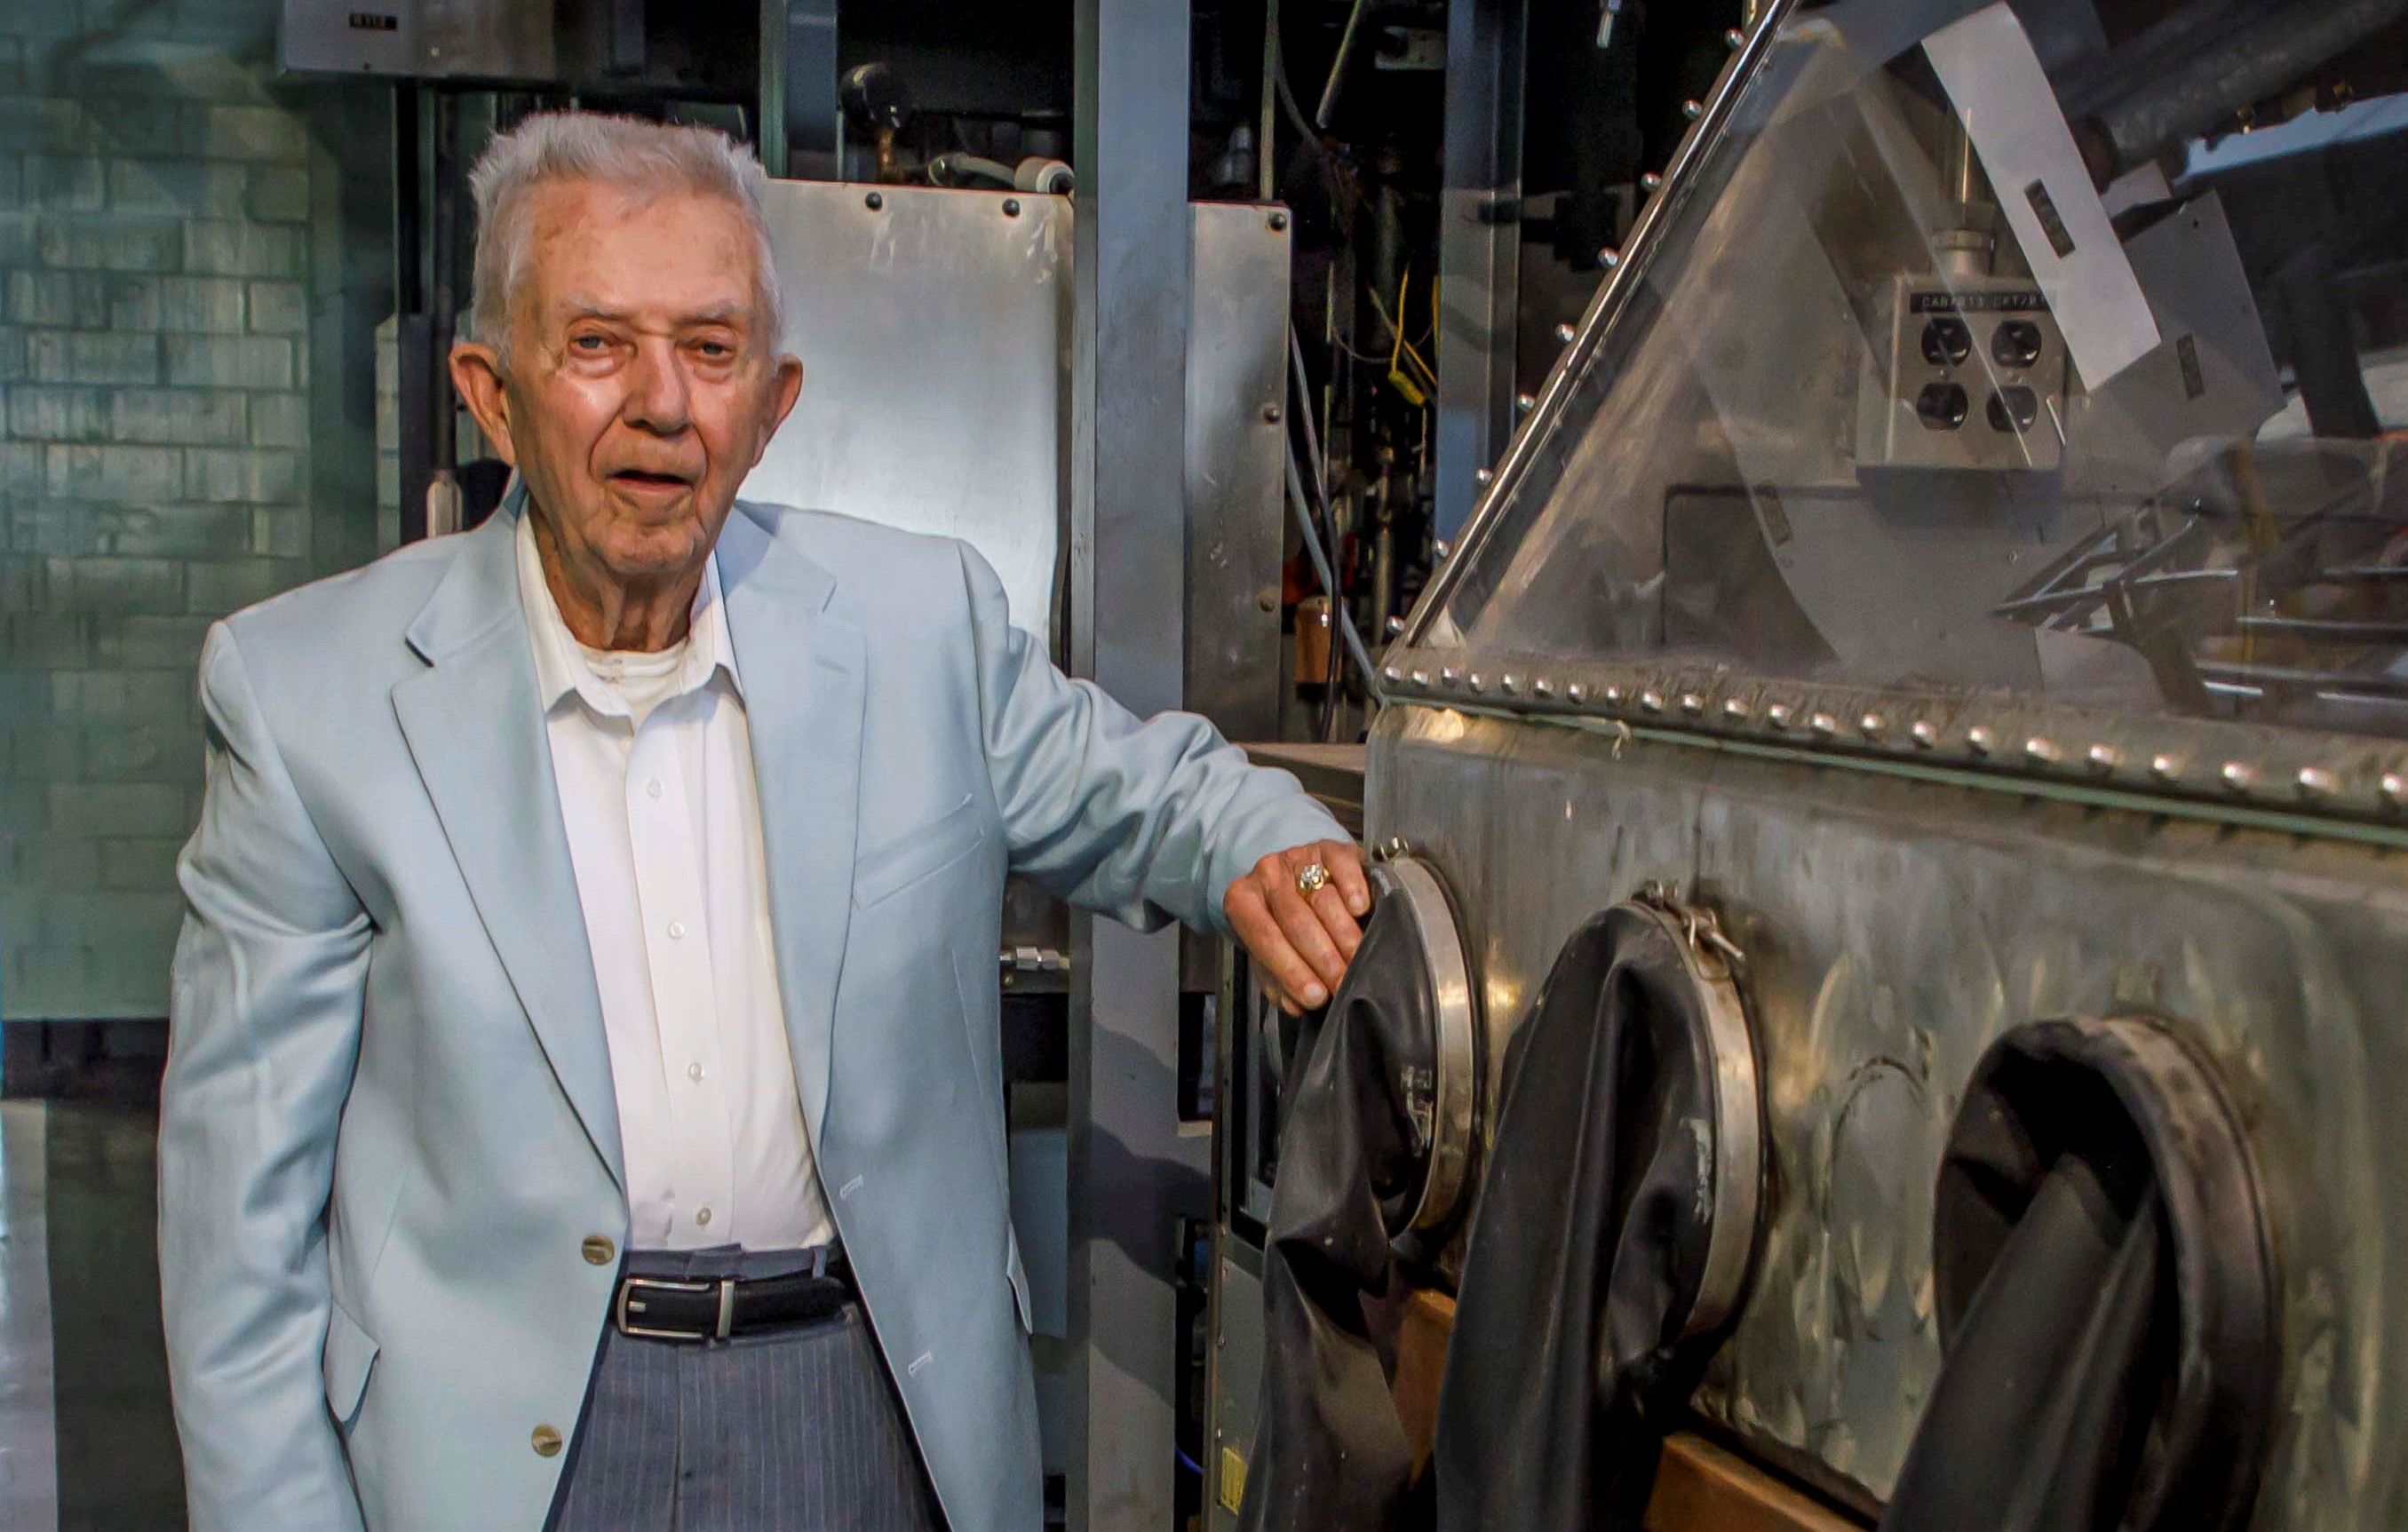 Bill Clark poses next to a glove box similar to one he worked with in the 1950’s